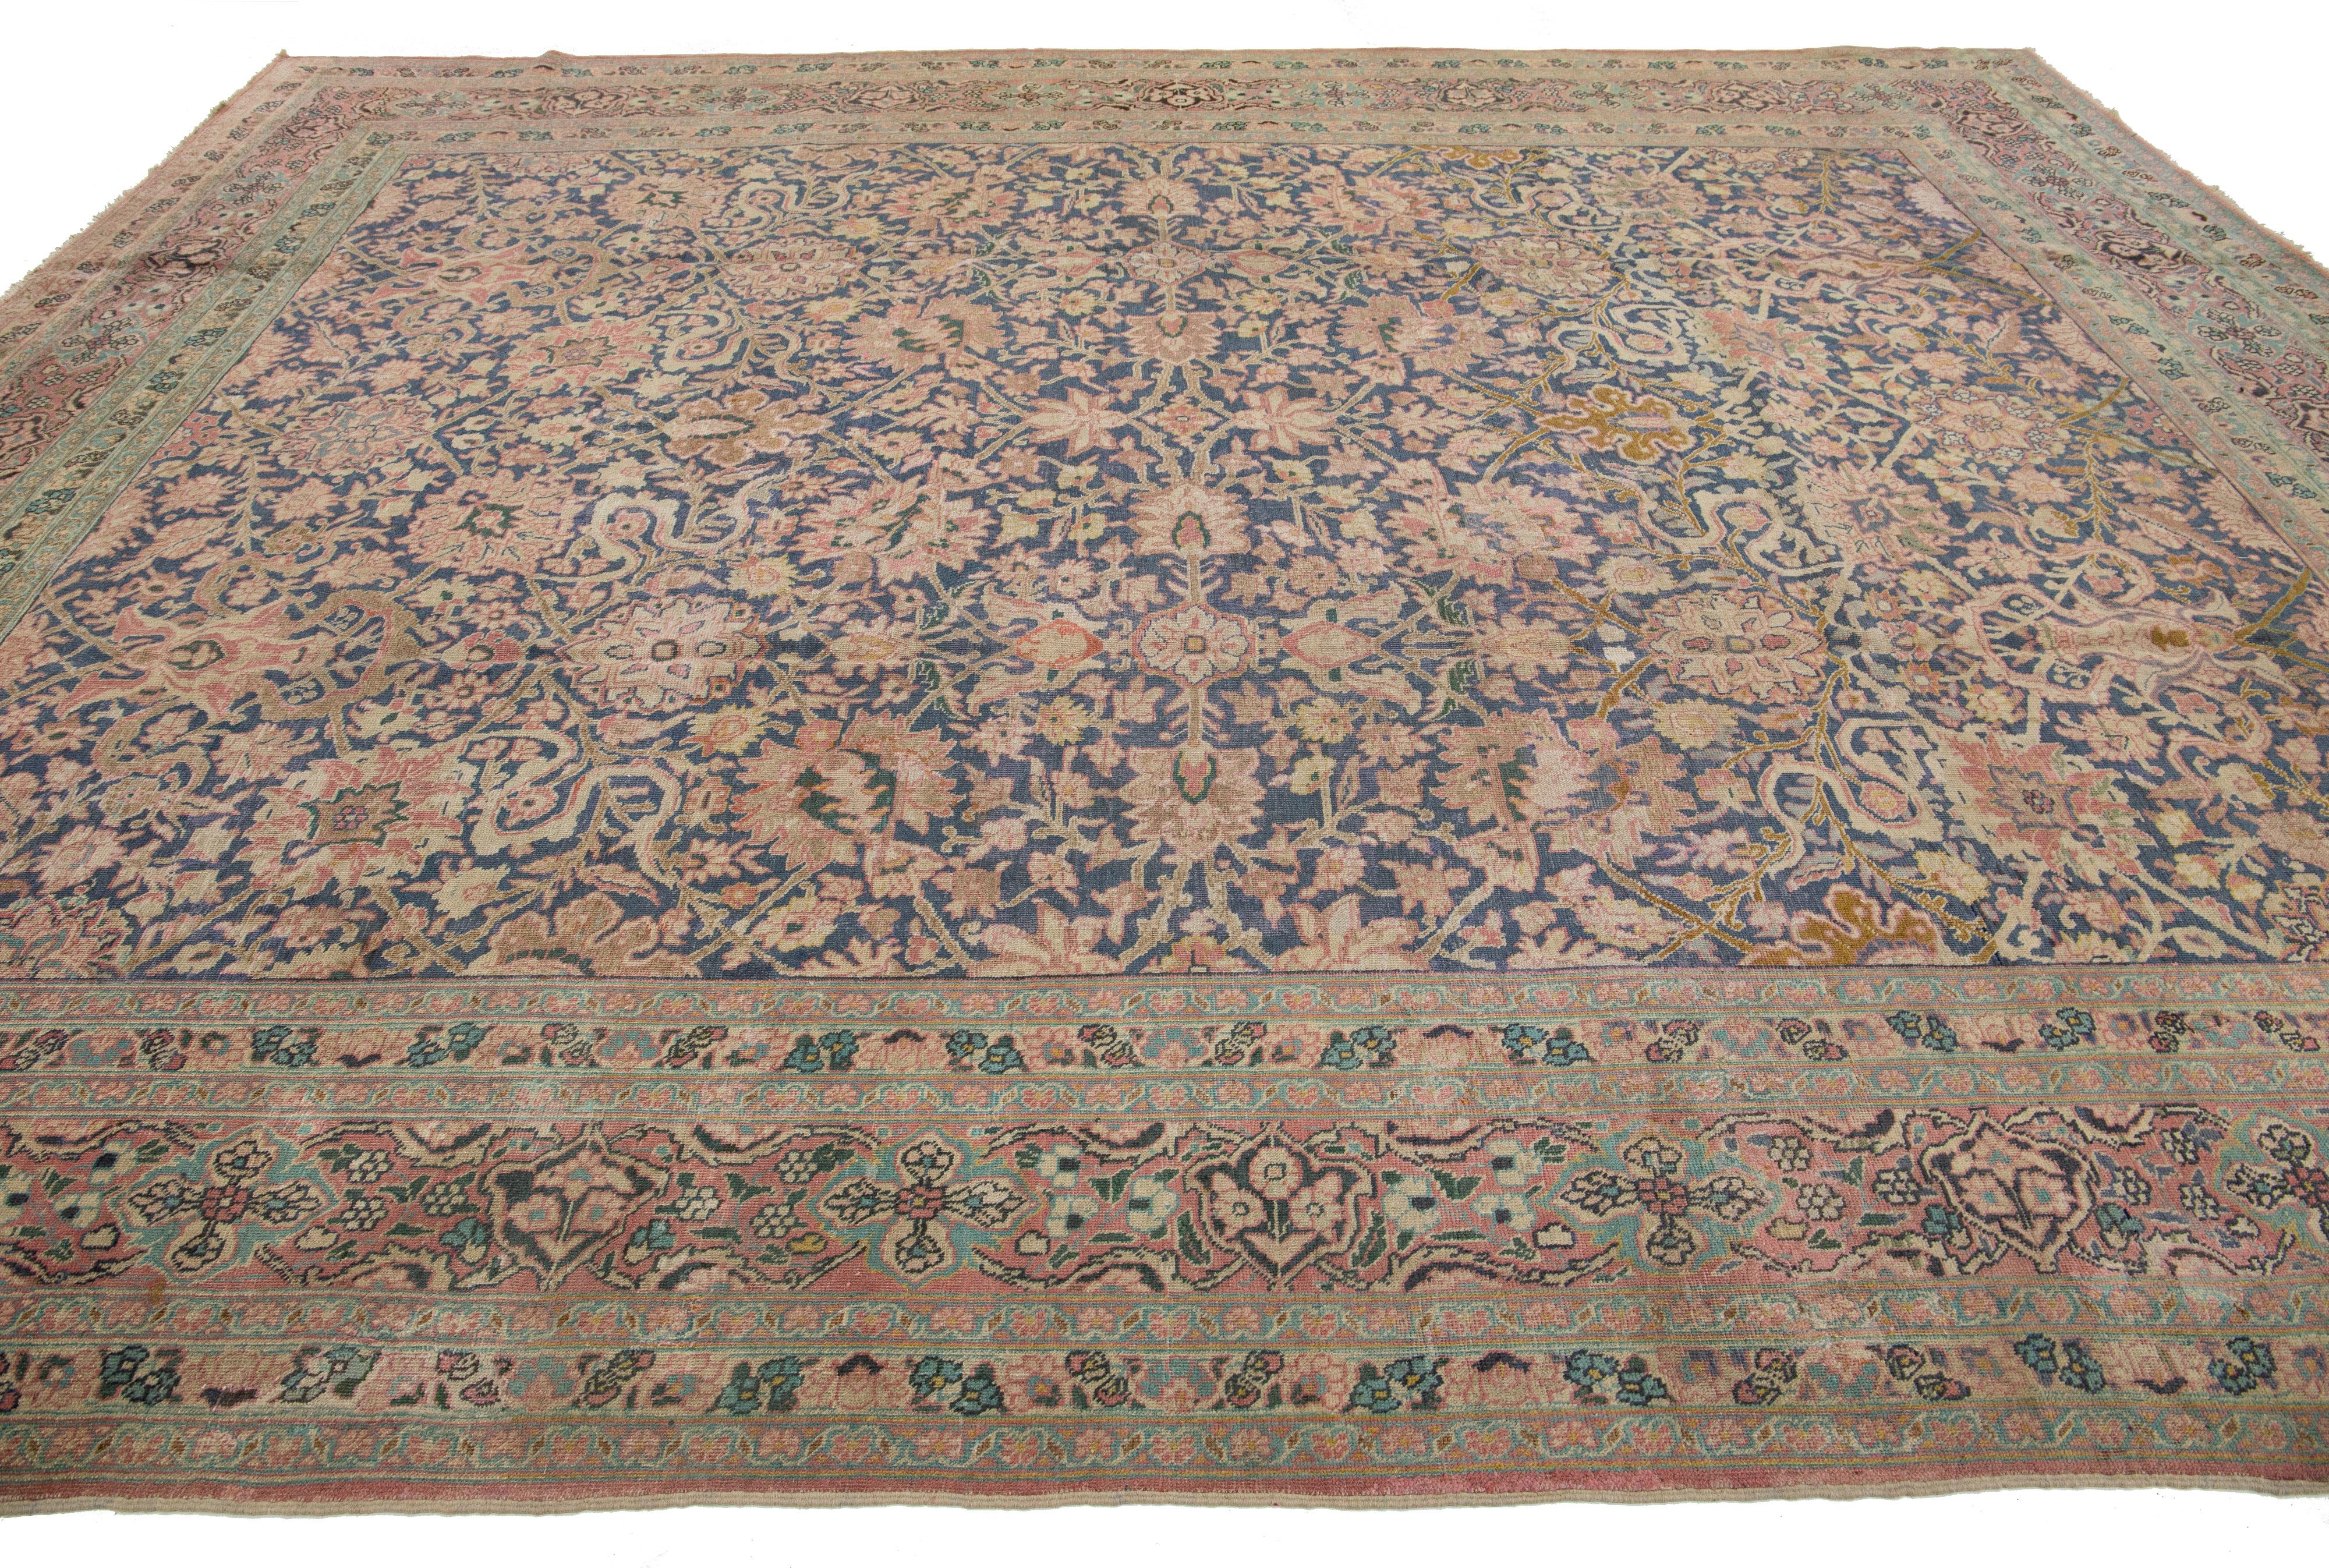 1920s Antique Persian Tabriz Blue Wool Rug With Allover Floral Pattern In Excellent Condition For Sale In Norwalk, CT